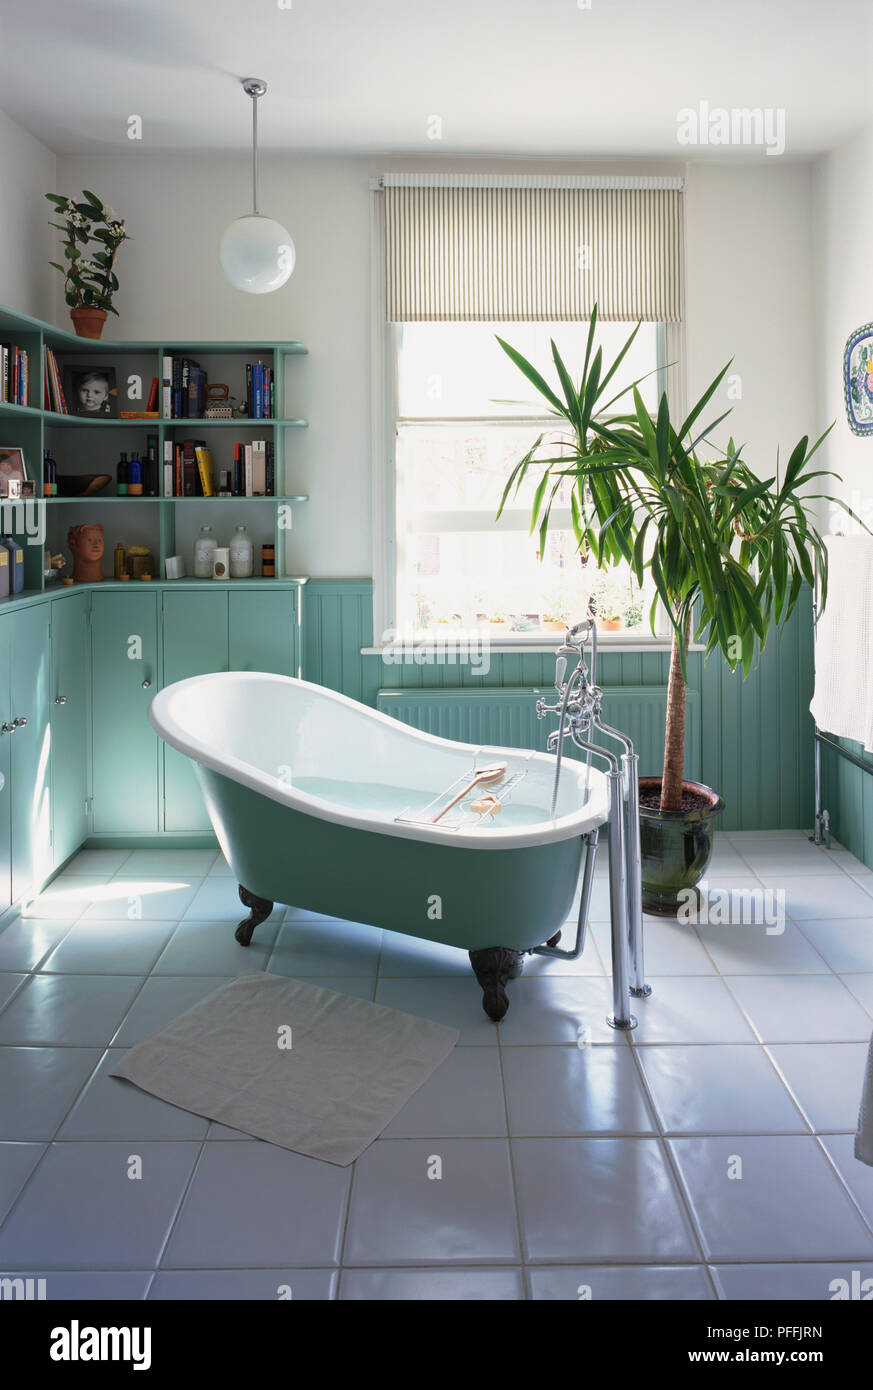 Large bright bathroom; freestanding white and green bath with iron feet, wooden wall panelling painted green, cupboards and tall shelves, tiled floor, potted Yucca, open window. Stock Photo